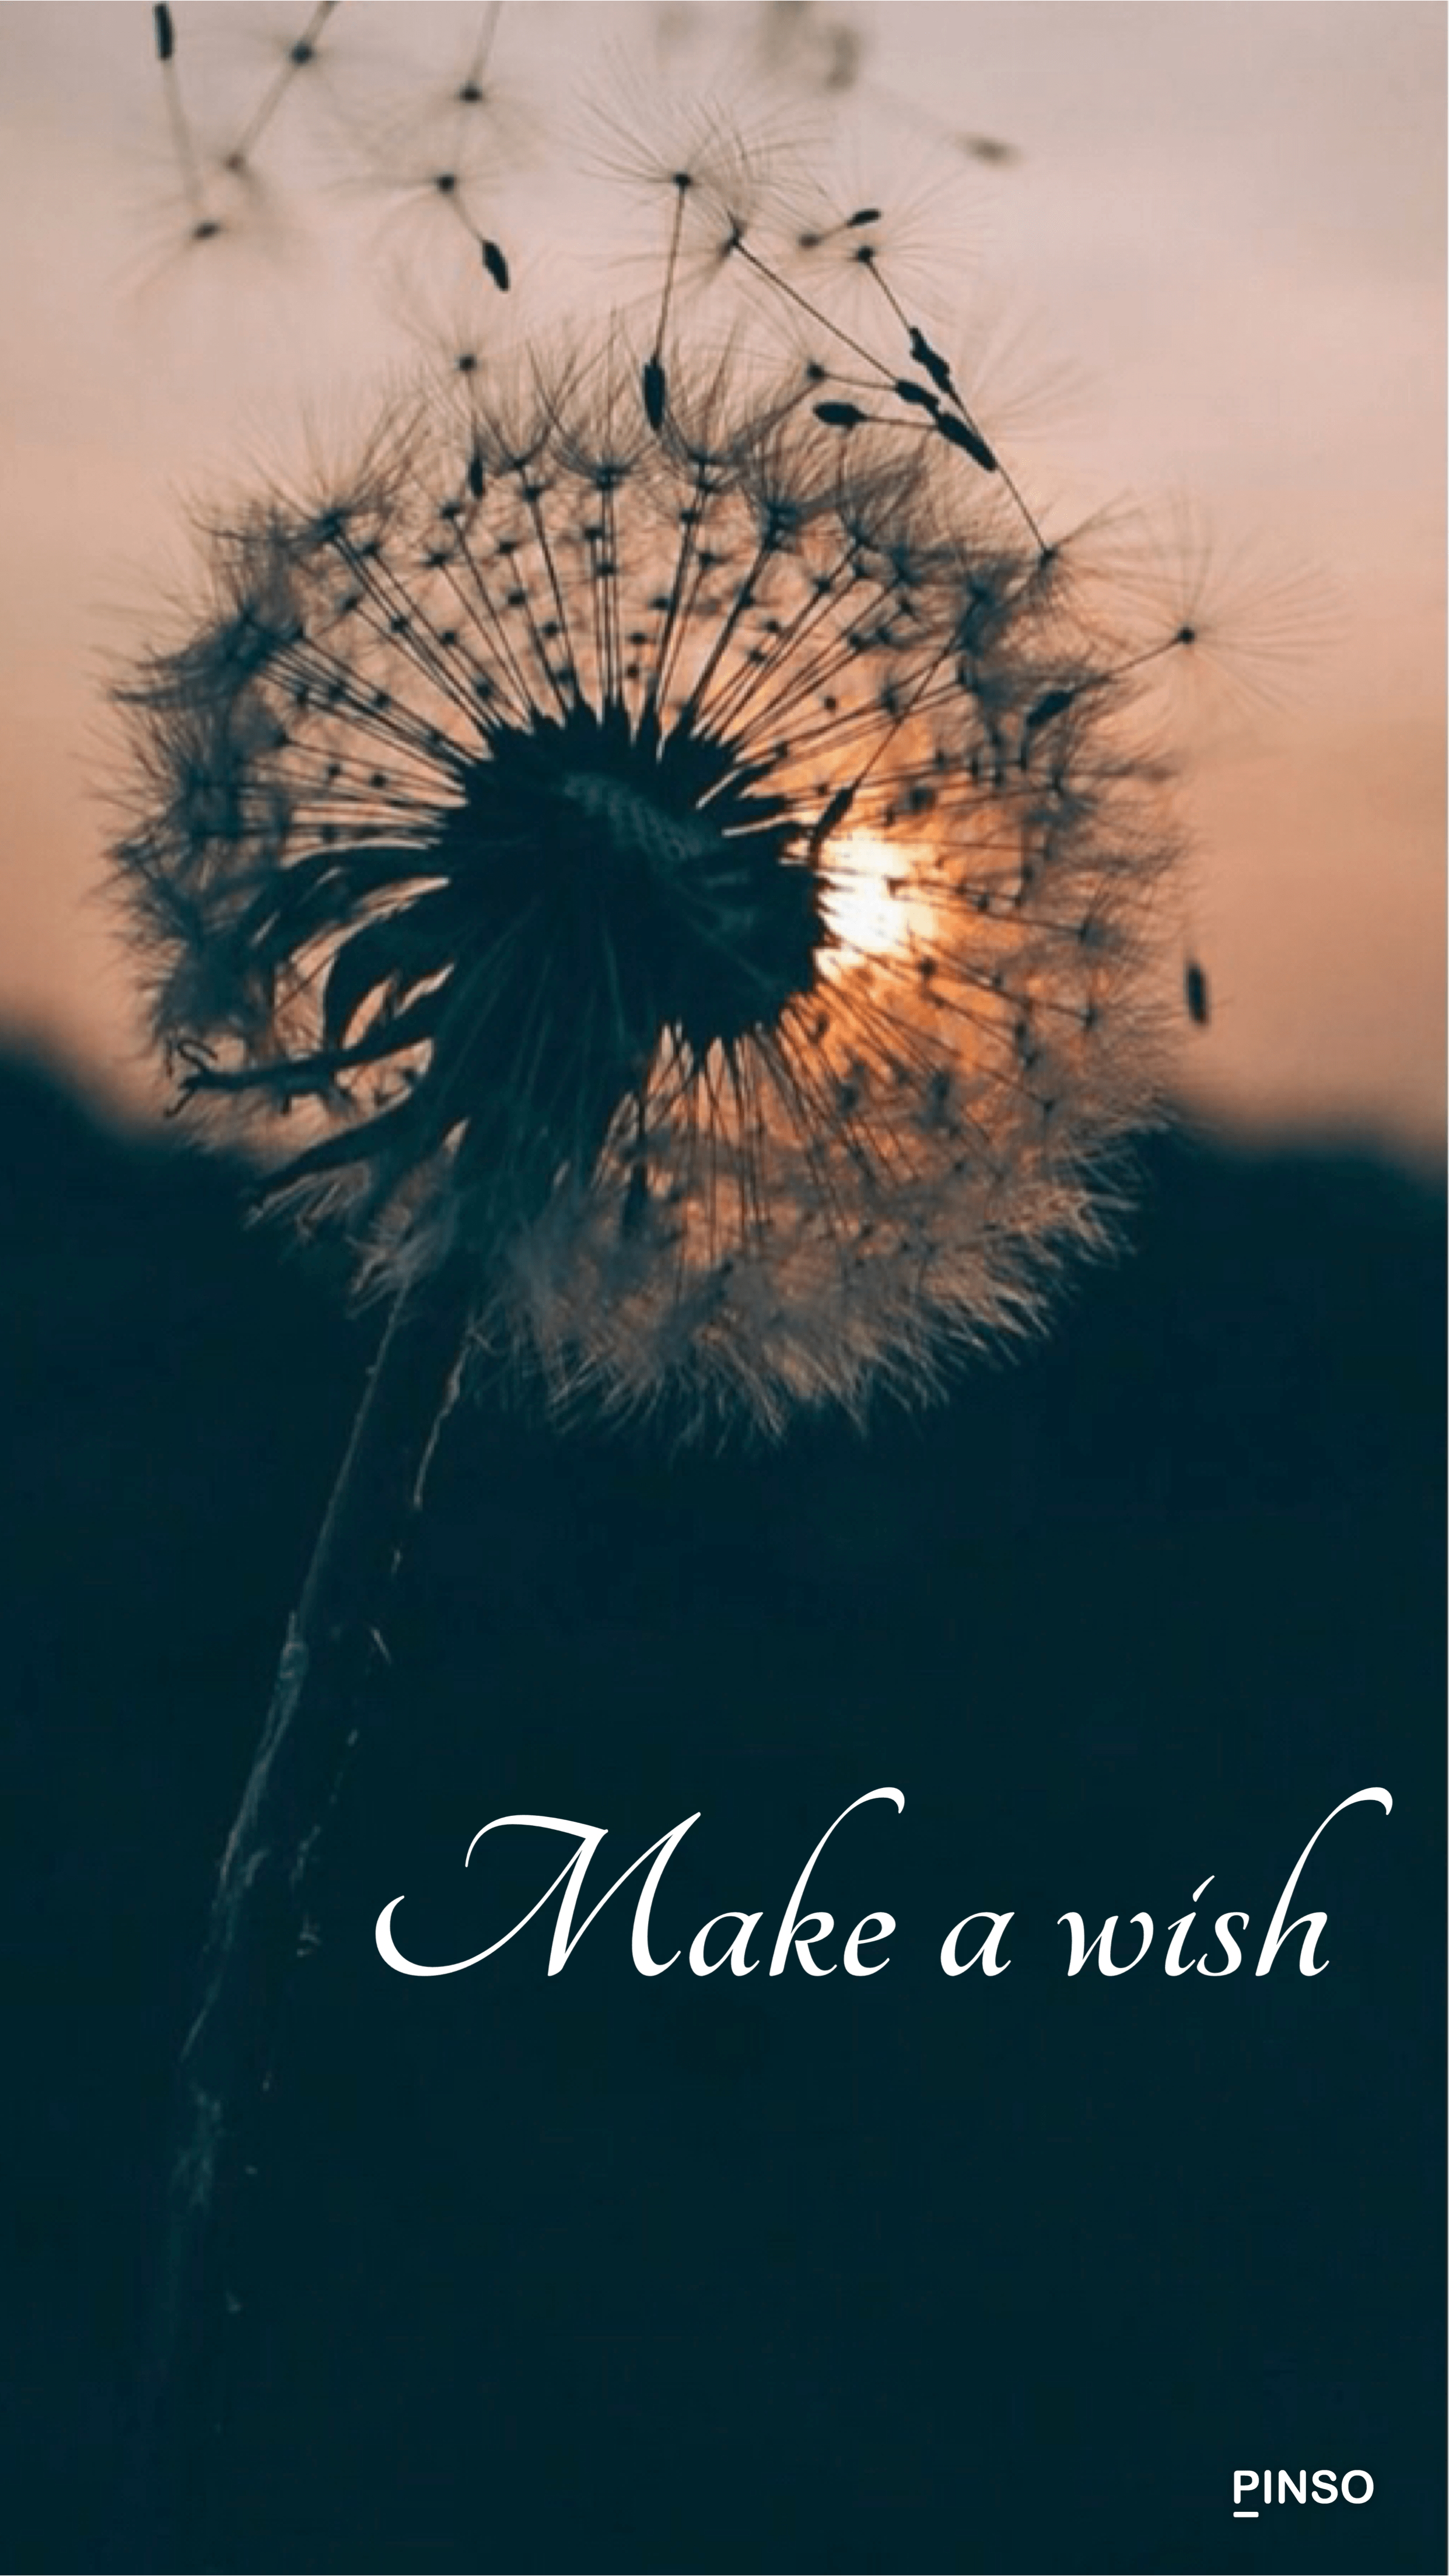 Make a wish. Wallpaper made by me on Pinso. Wallpaper